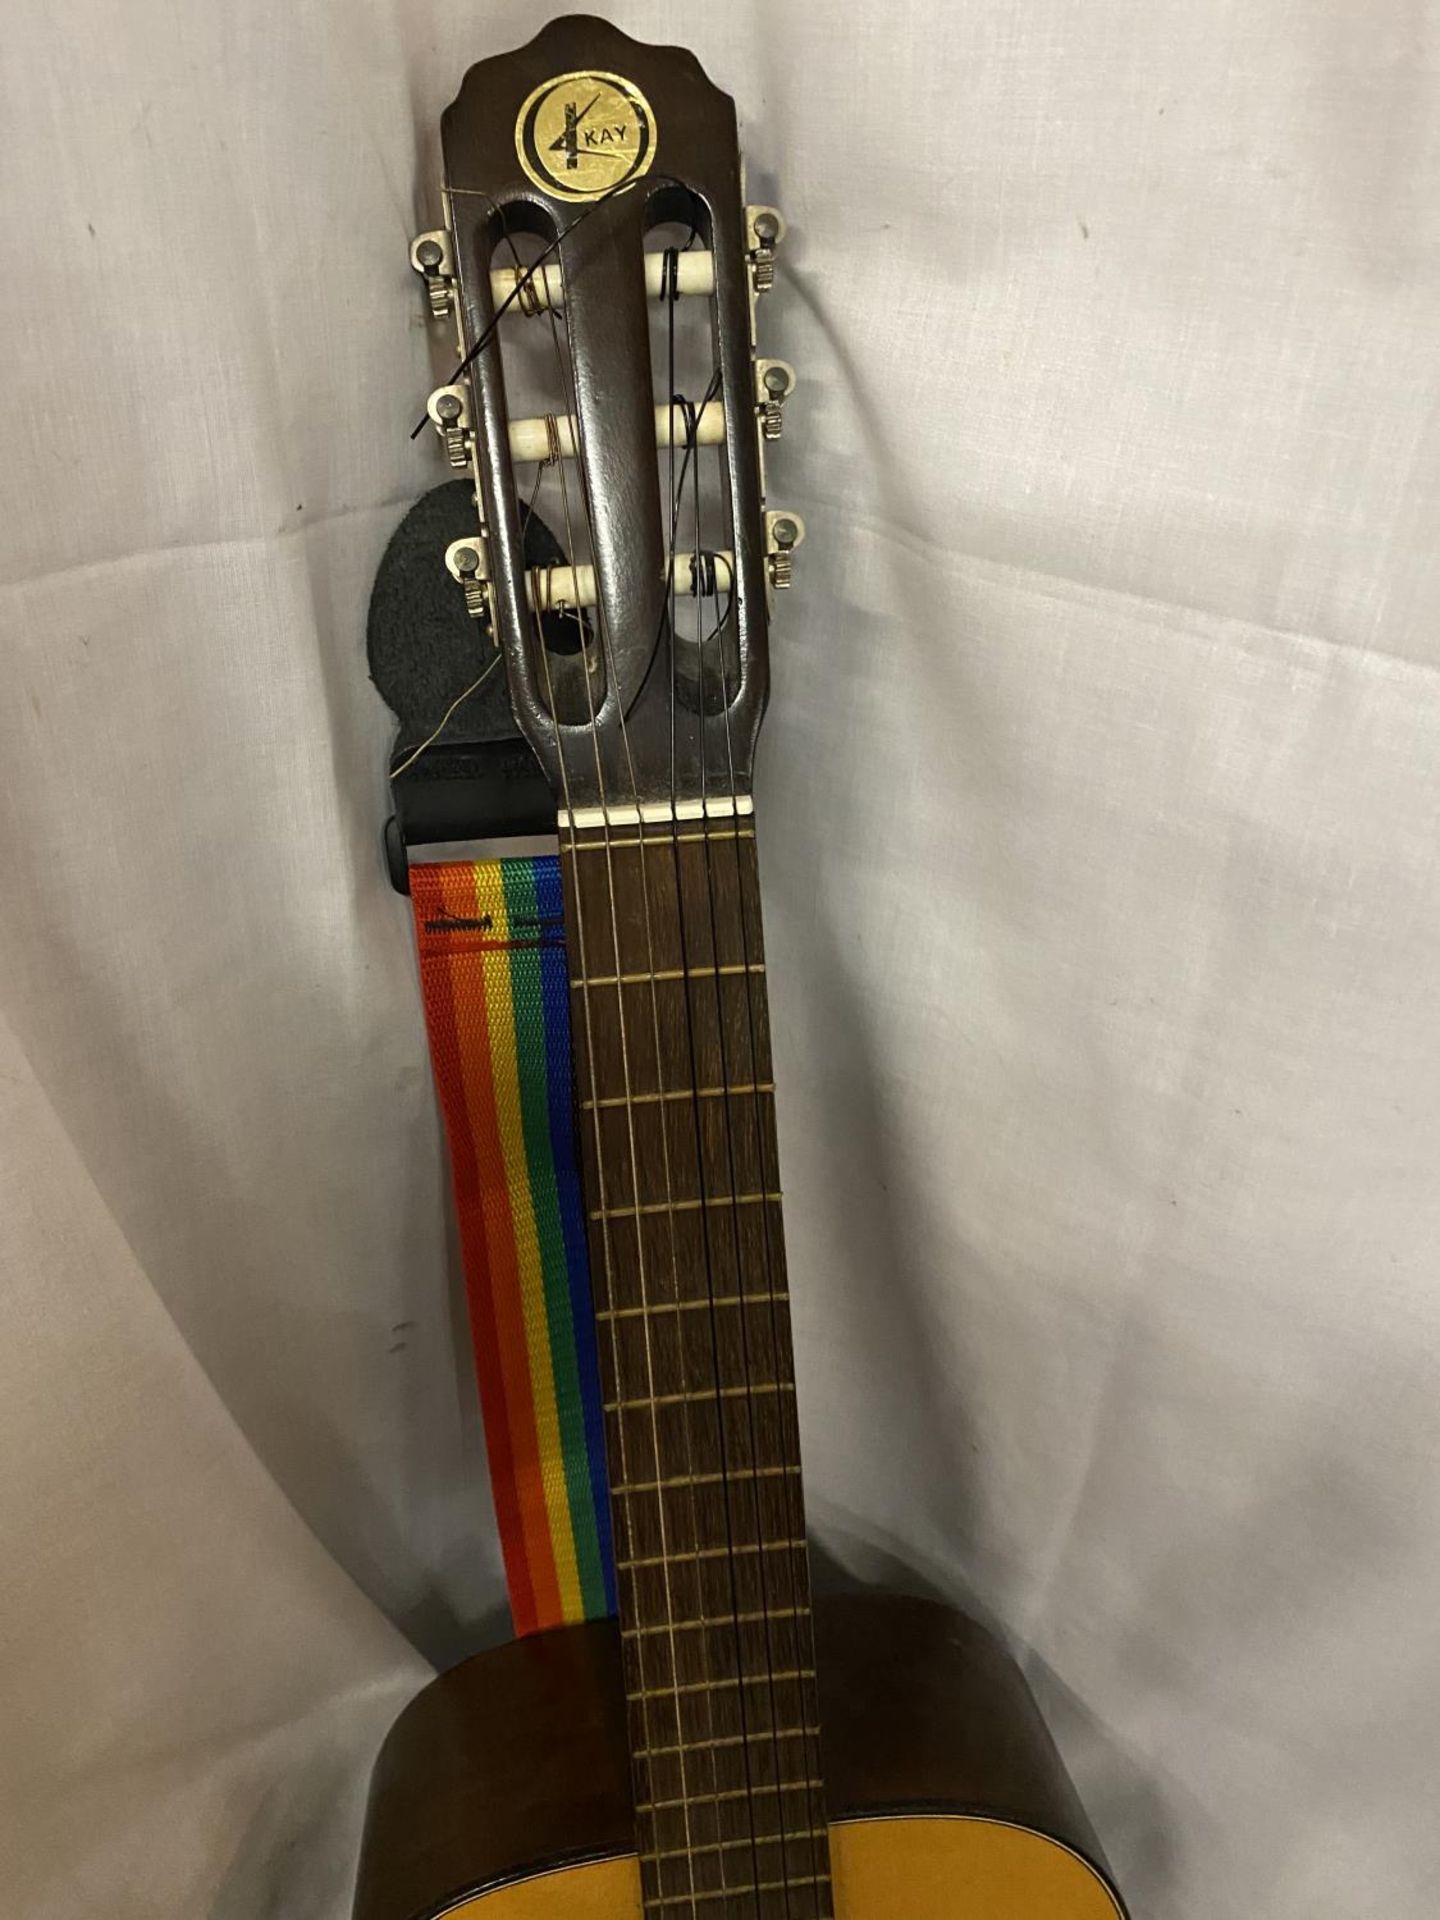 A KAY ACCOUSTIC GUITAR WITH A RAINBOW COLOURED STRAP - Image 2 of 4